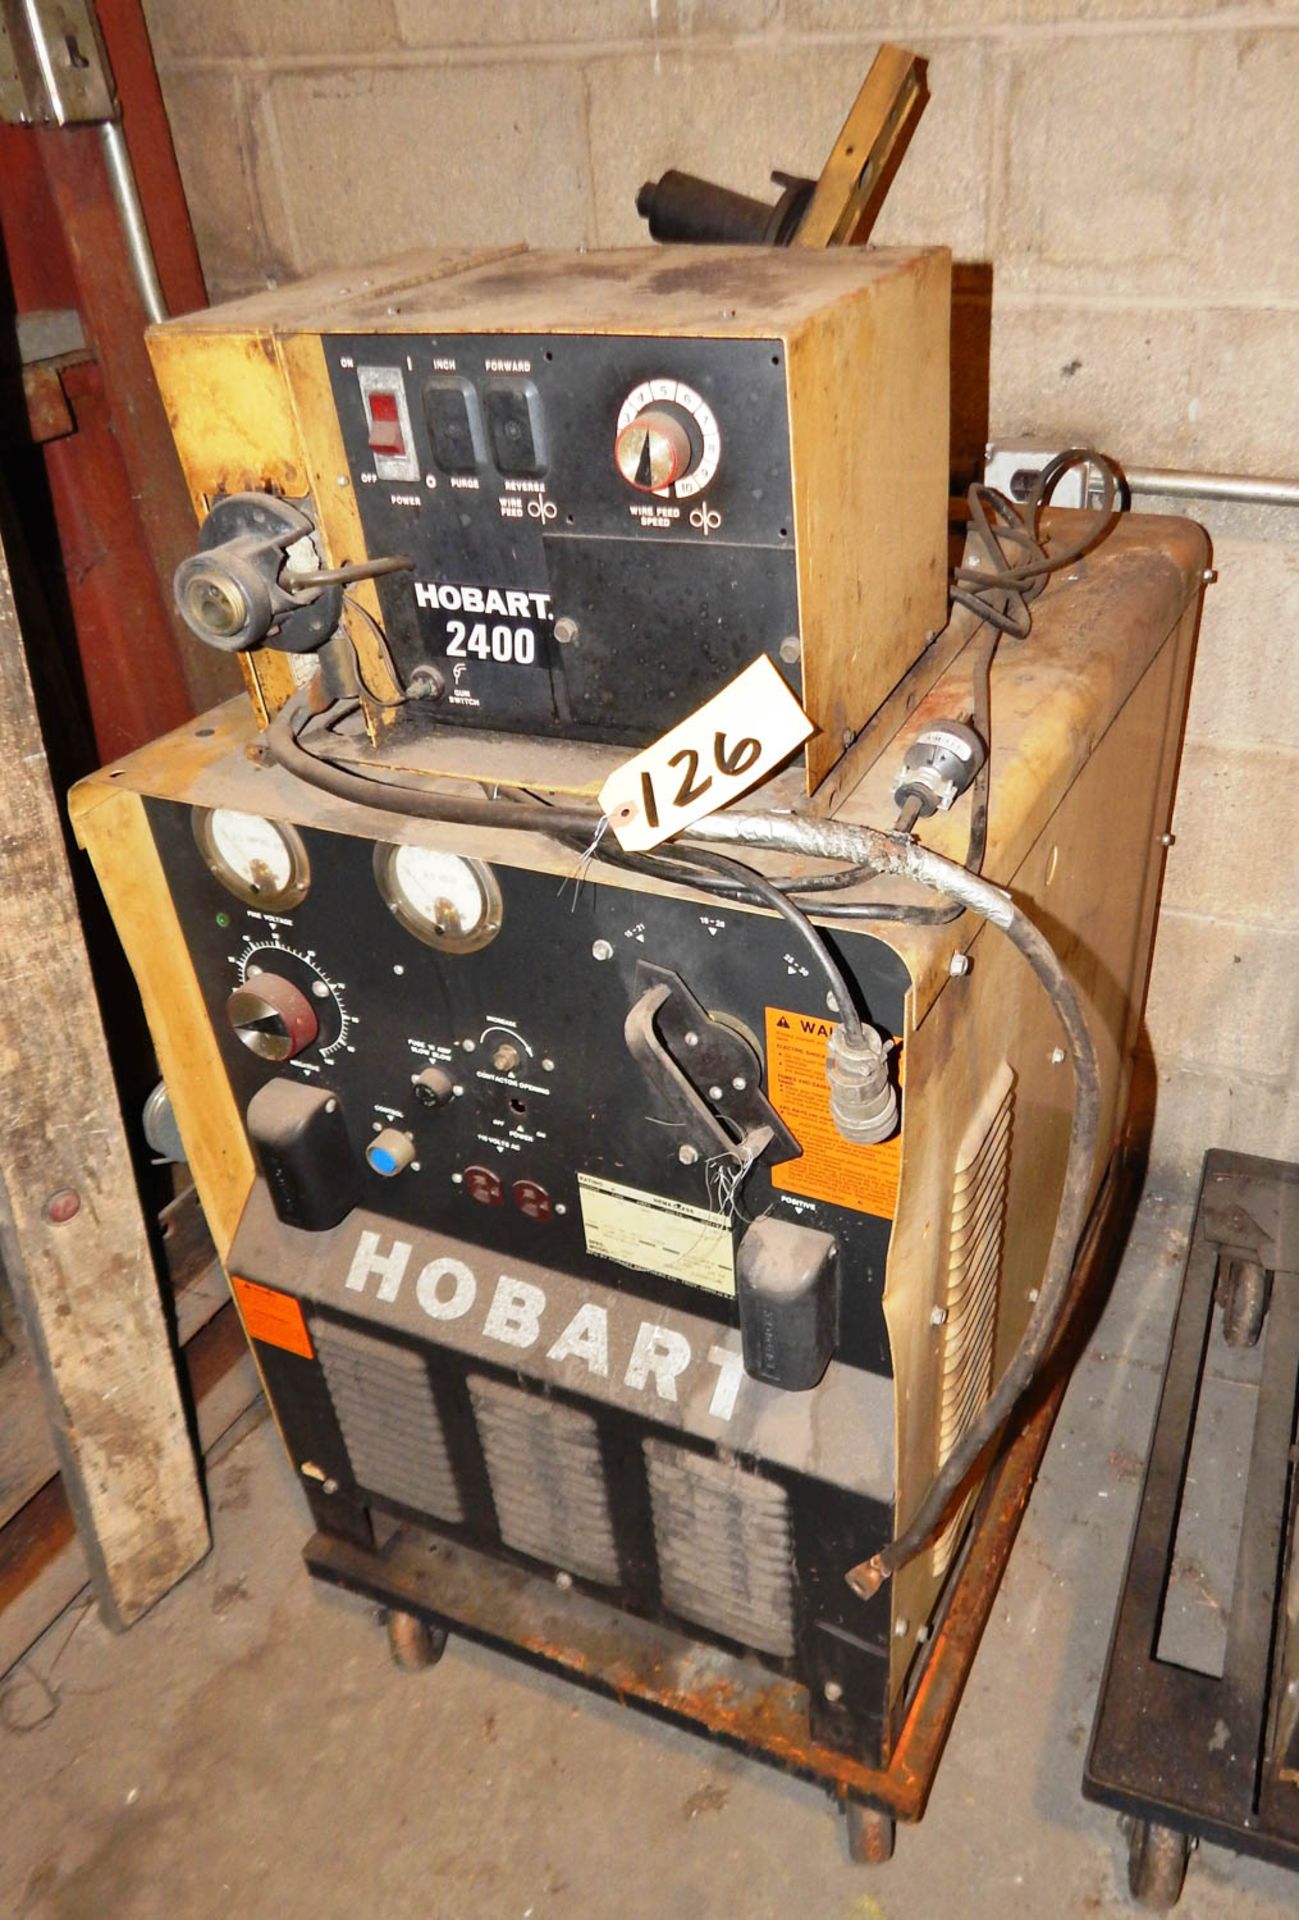 HOBART RC-301 AC/DC POWER SOURCE WITH HOBART 2400 WIRE FEEDER S/N: 86WS03608